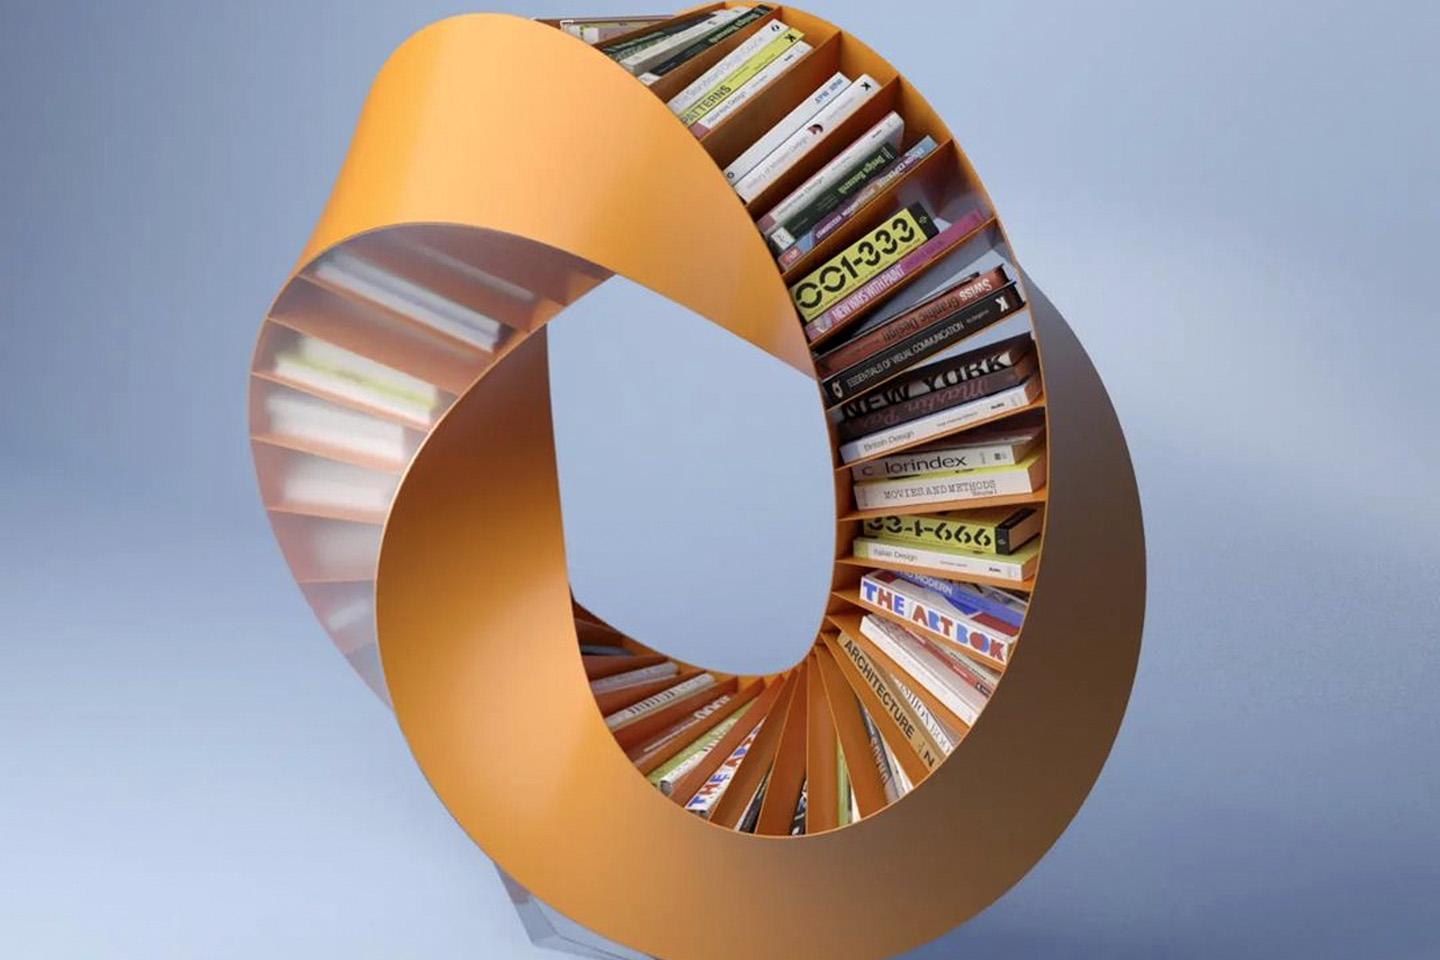 This twisting sculptural furniture design provides a new identity to conventional bookshelves